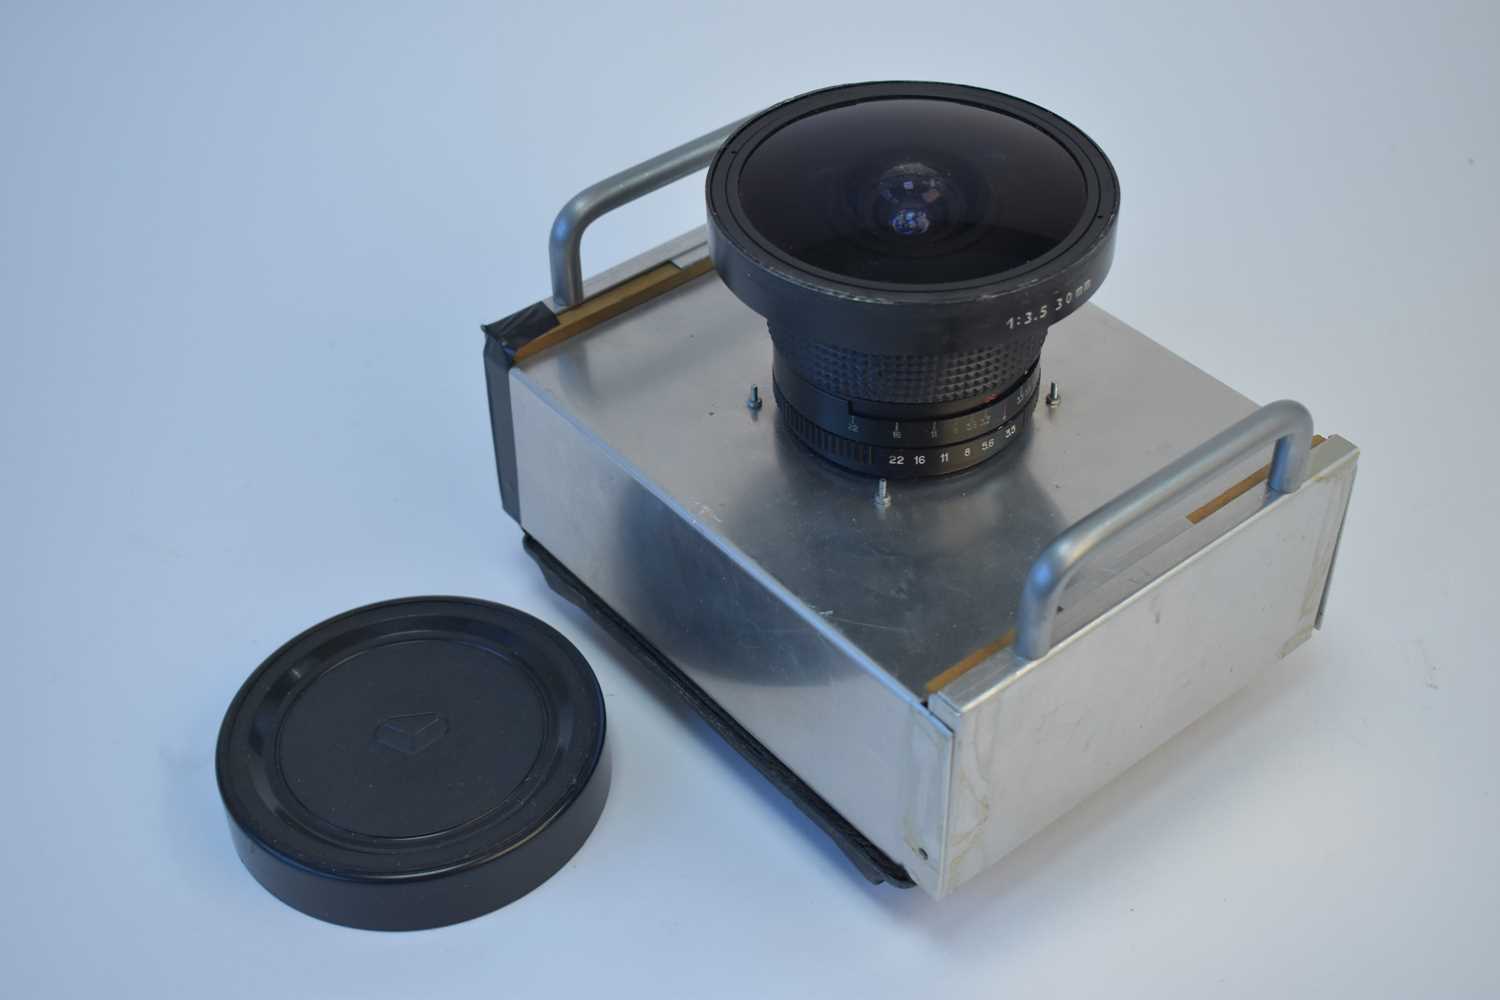 Lot 799 - A large format wideangle camera.